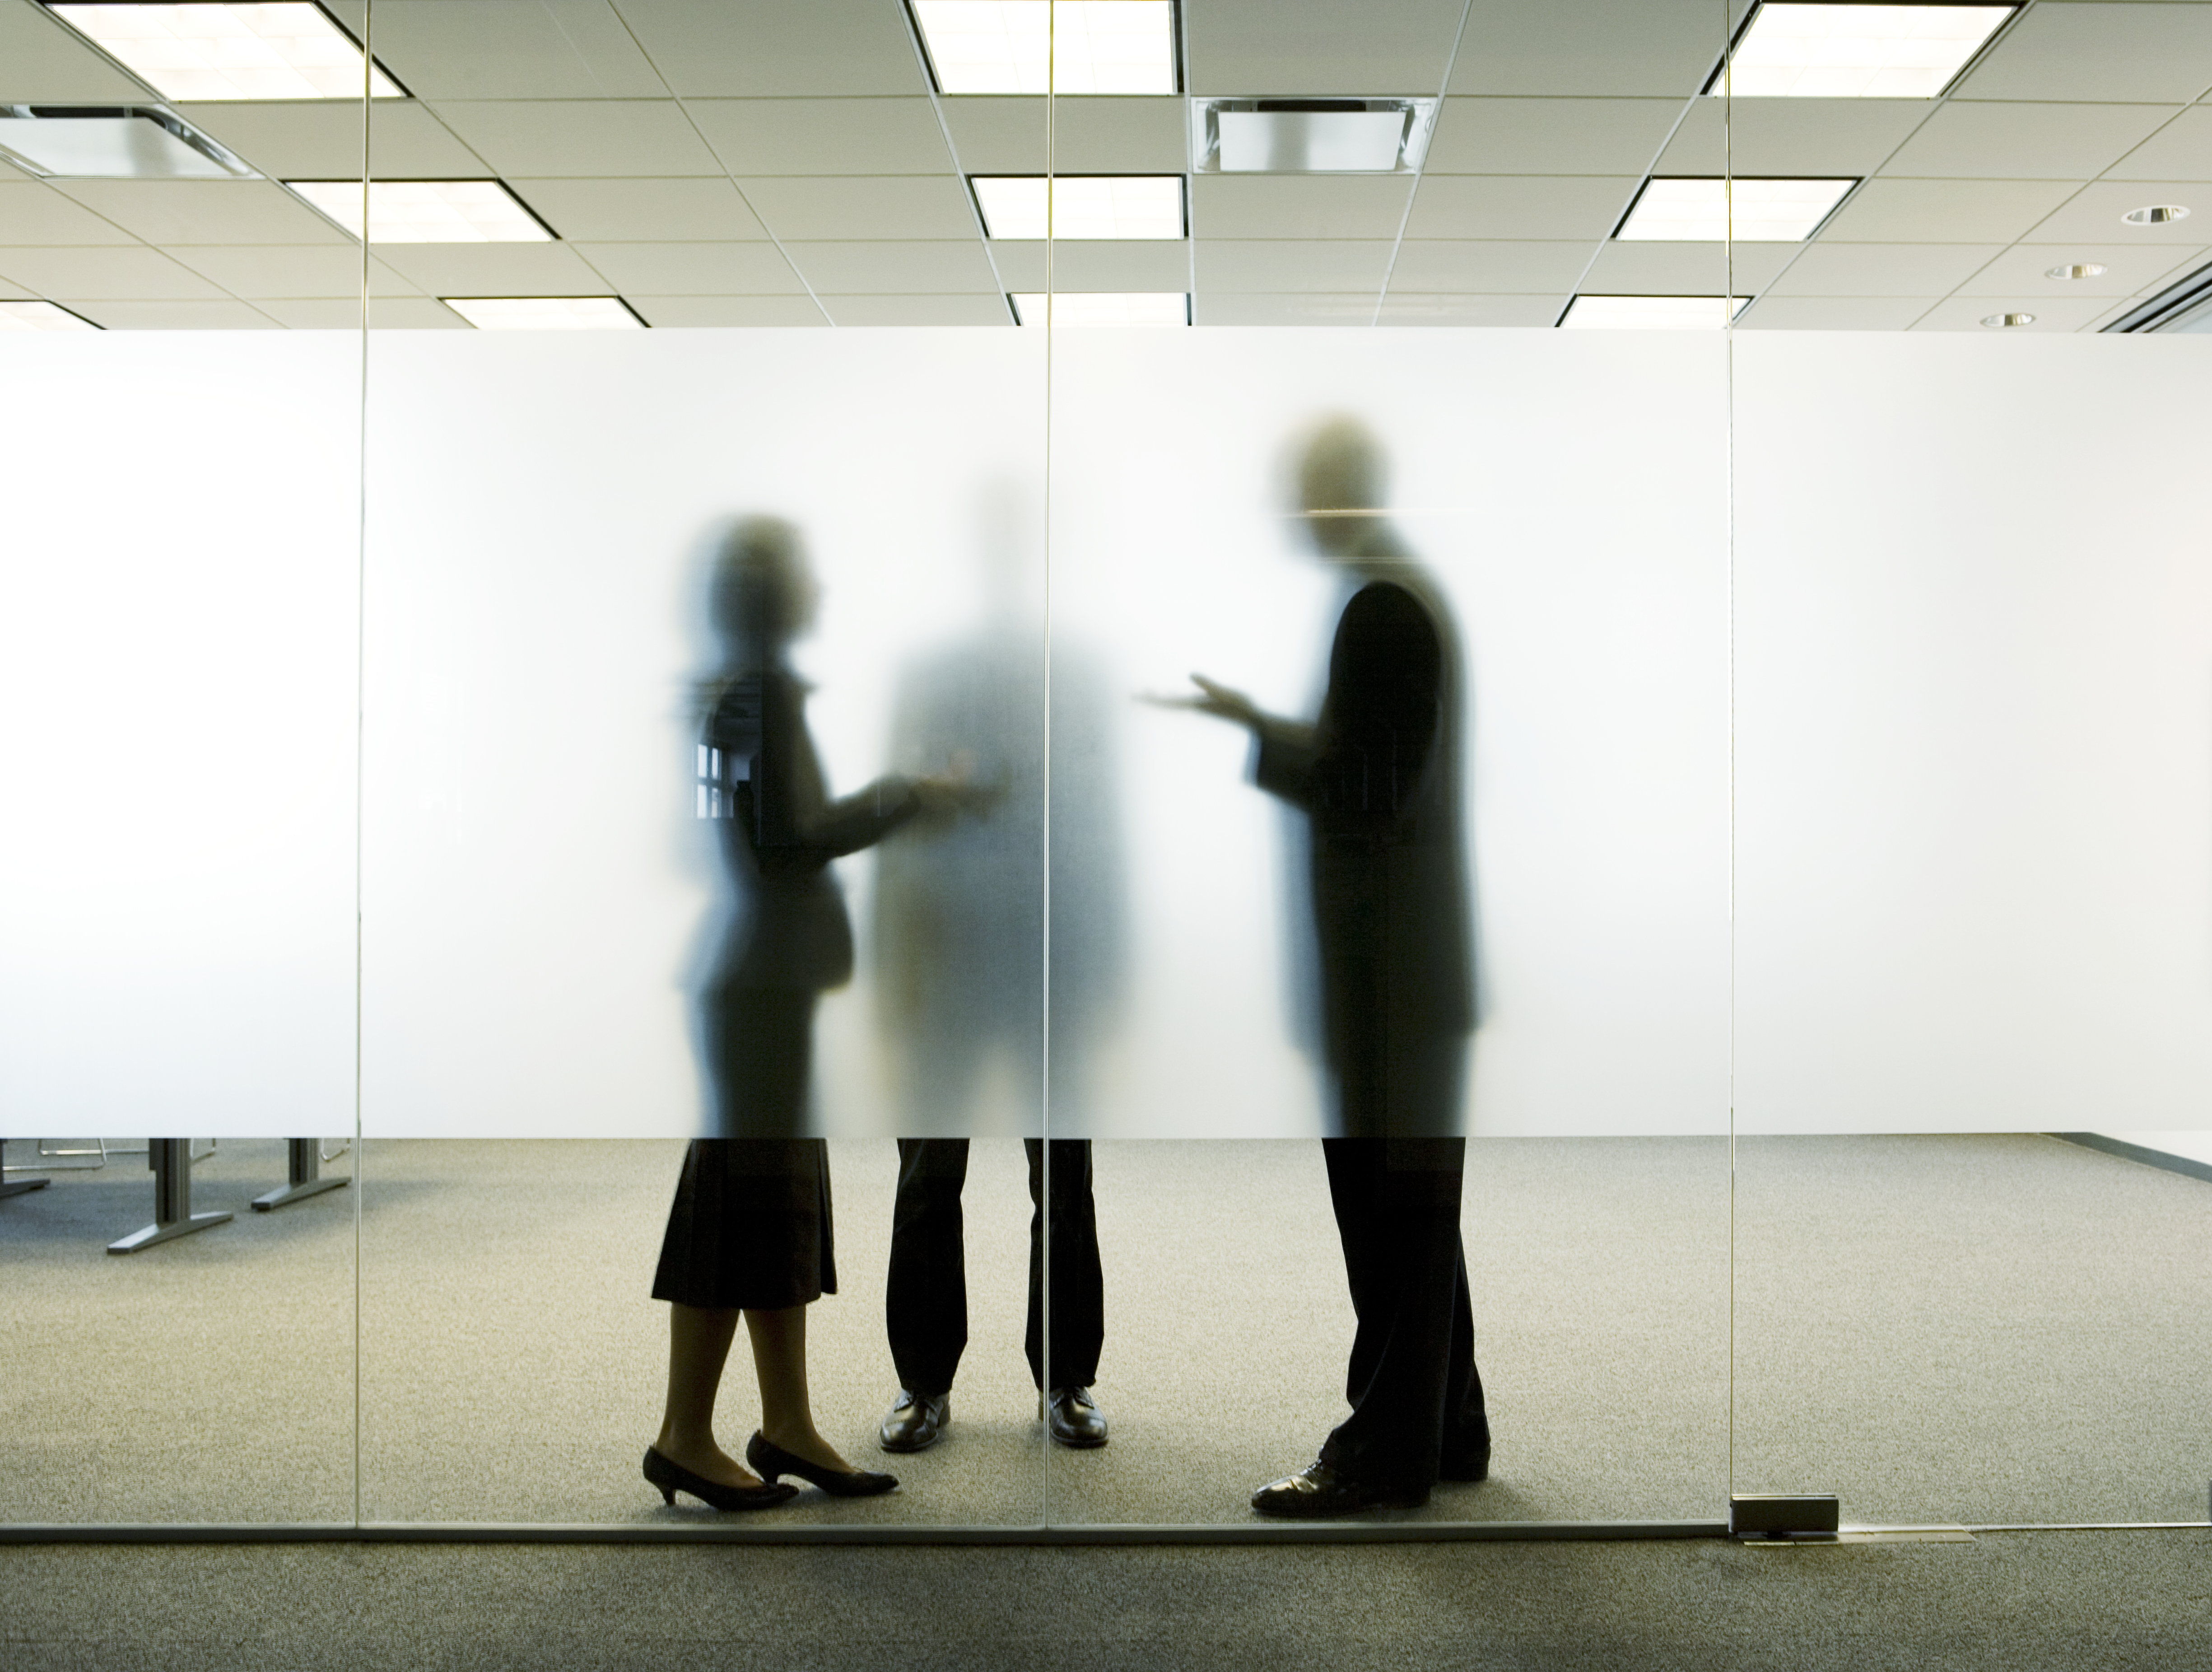 An office with frosted glass | Source: Getty Images